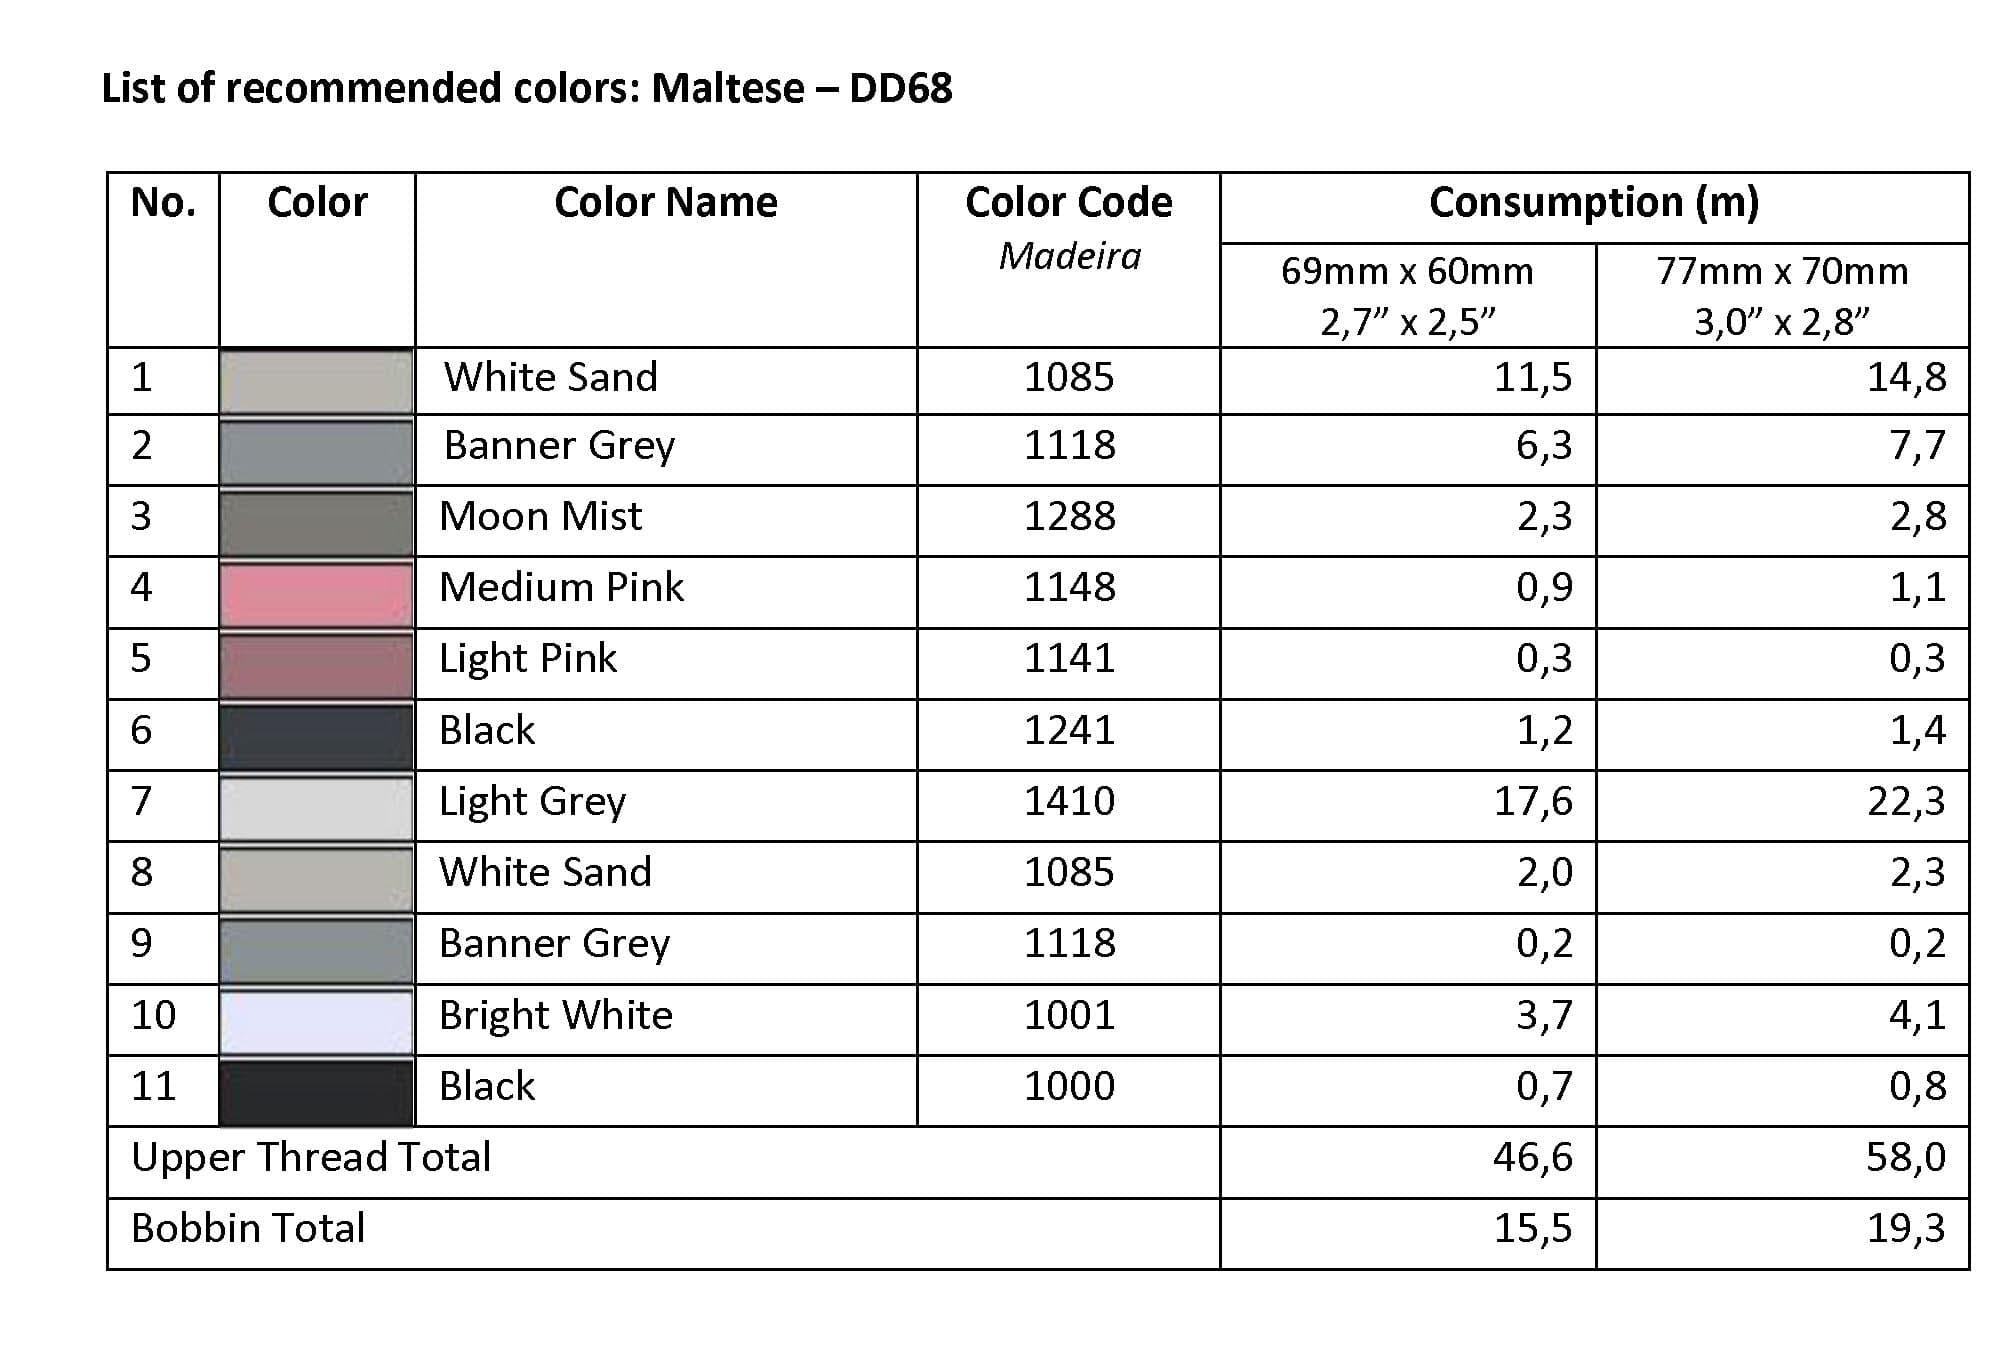 List of Recommended Colors - Maltese DD68